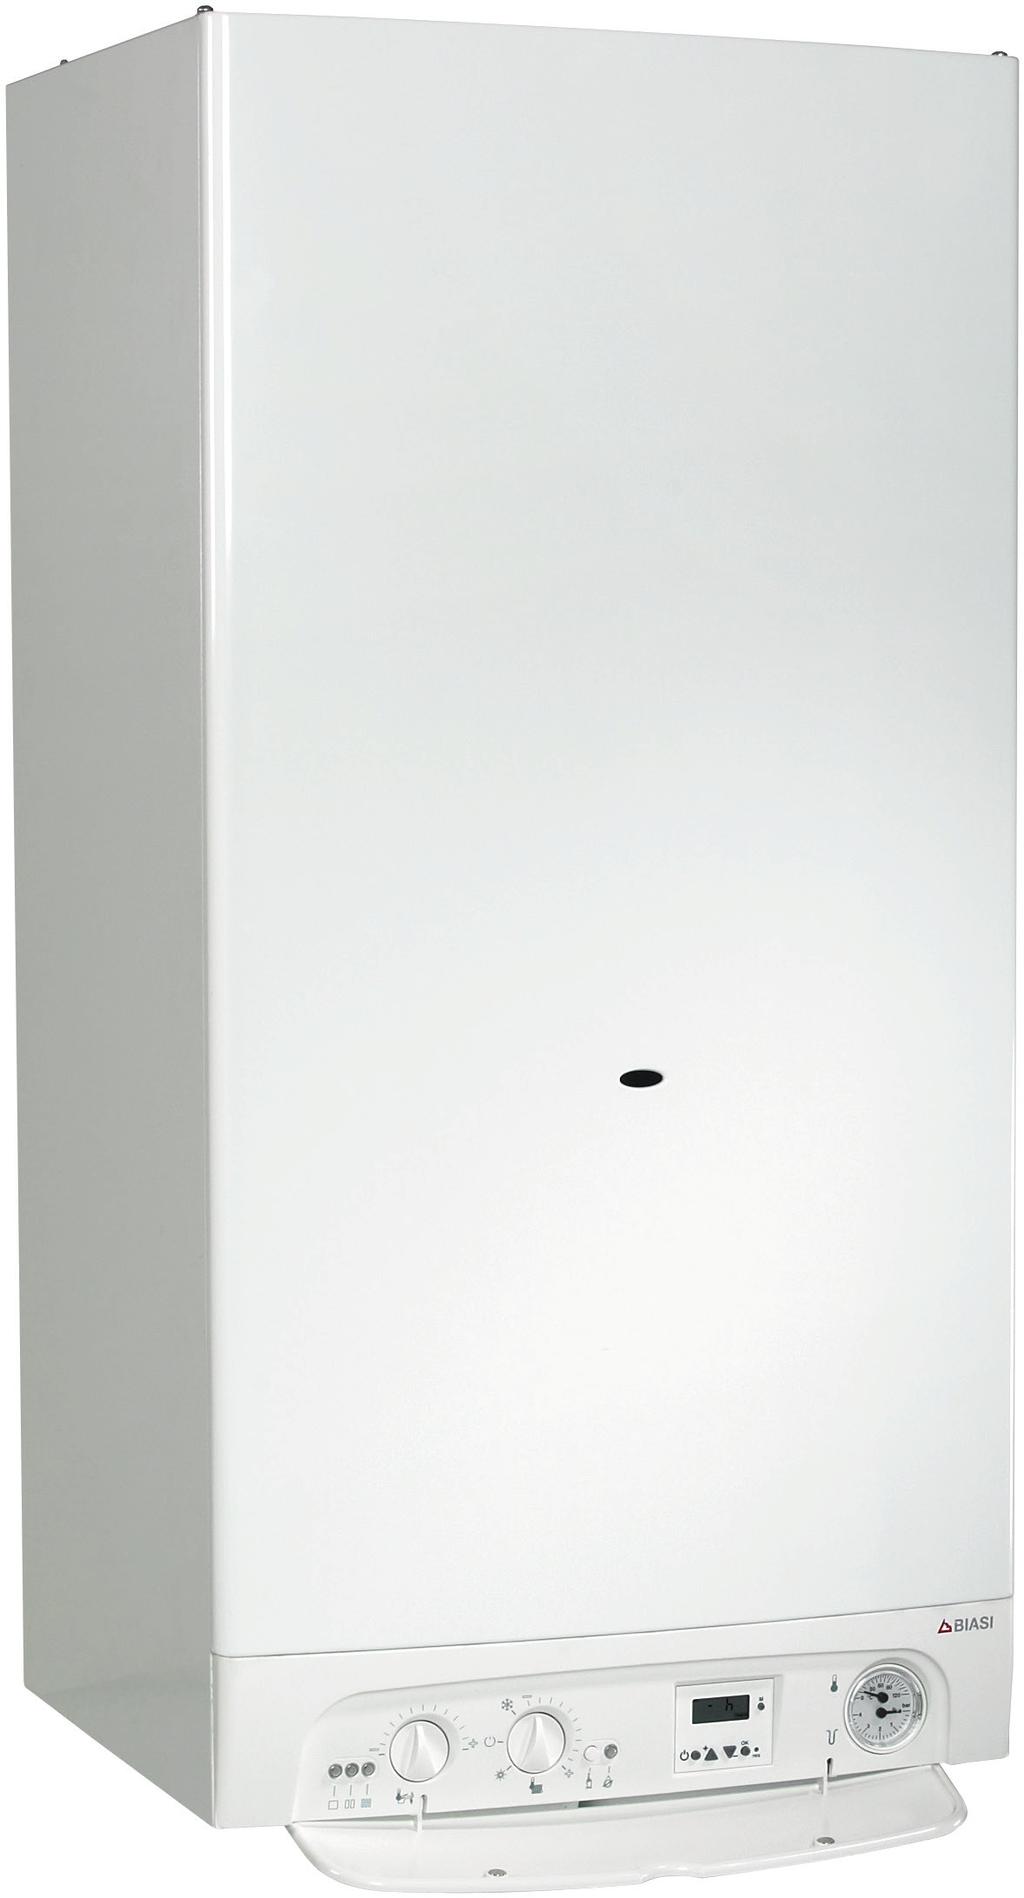 04 Biasi / High-efficiency, ErP-ready Combi and System Boilers The range was inspired by the successful Riva Compact boiler.